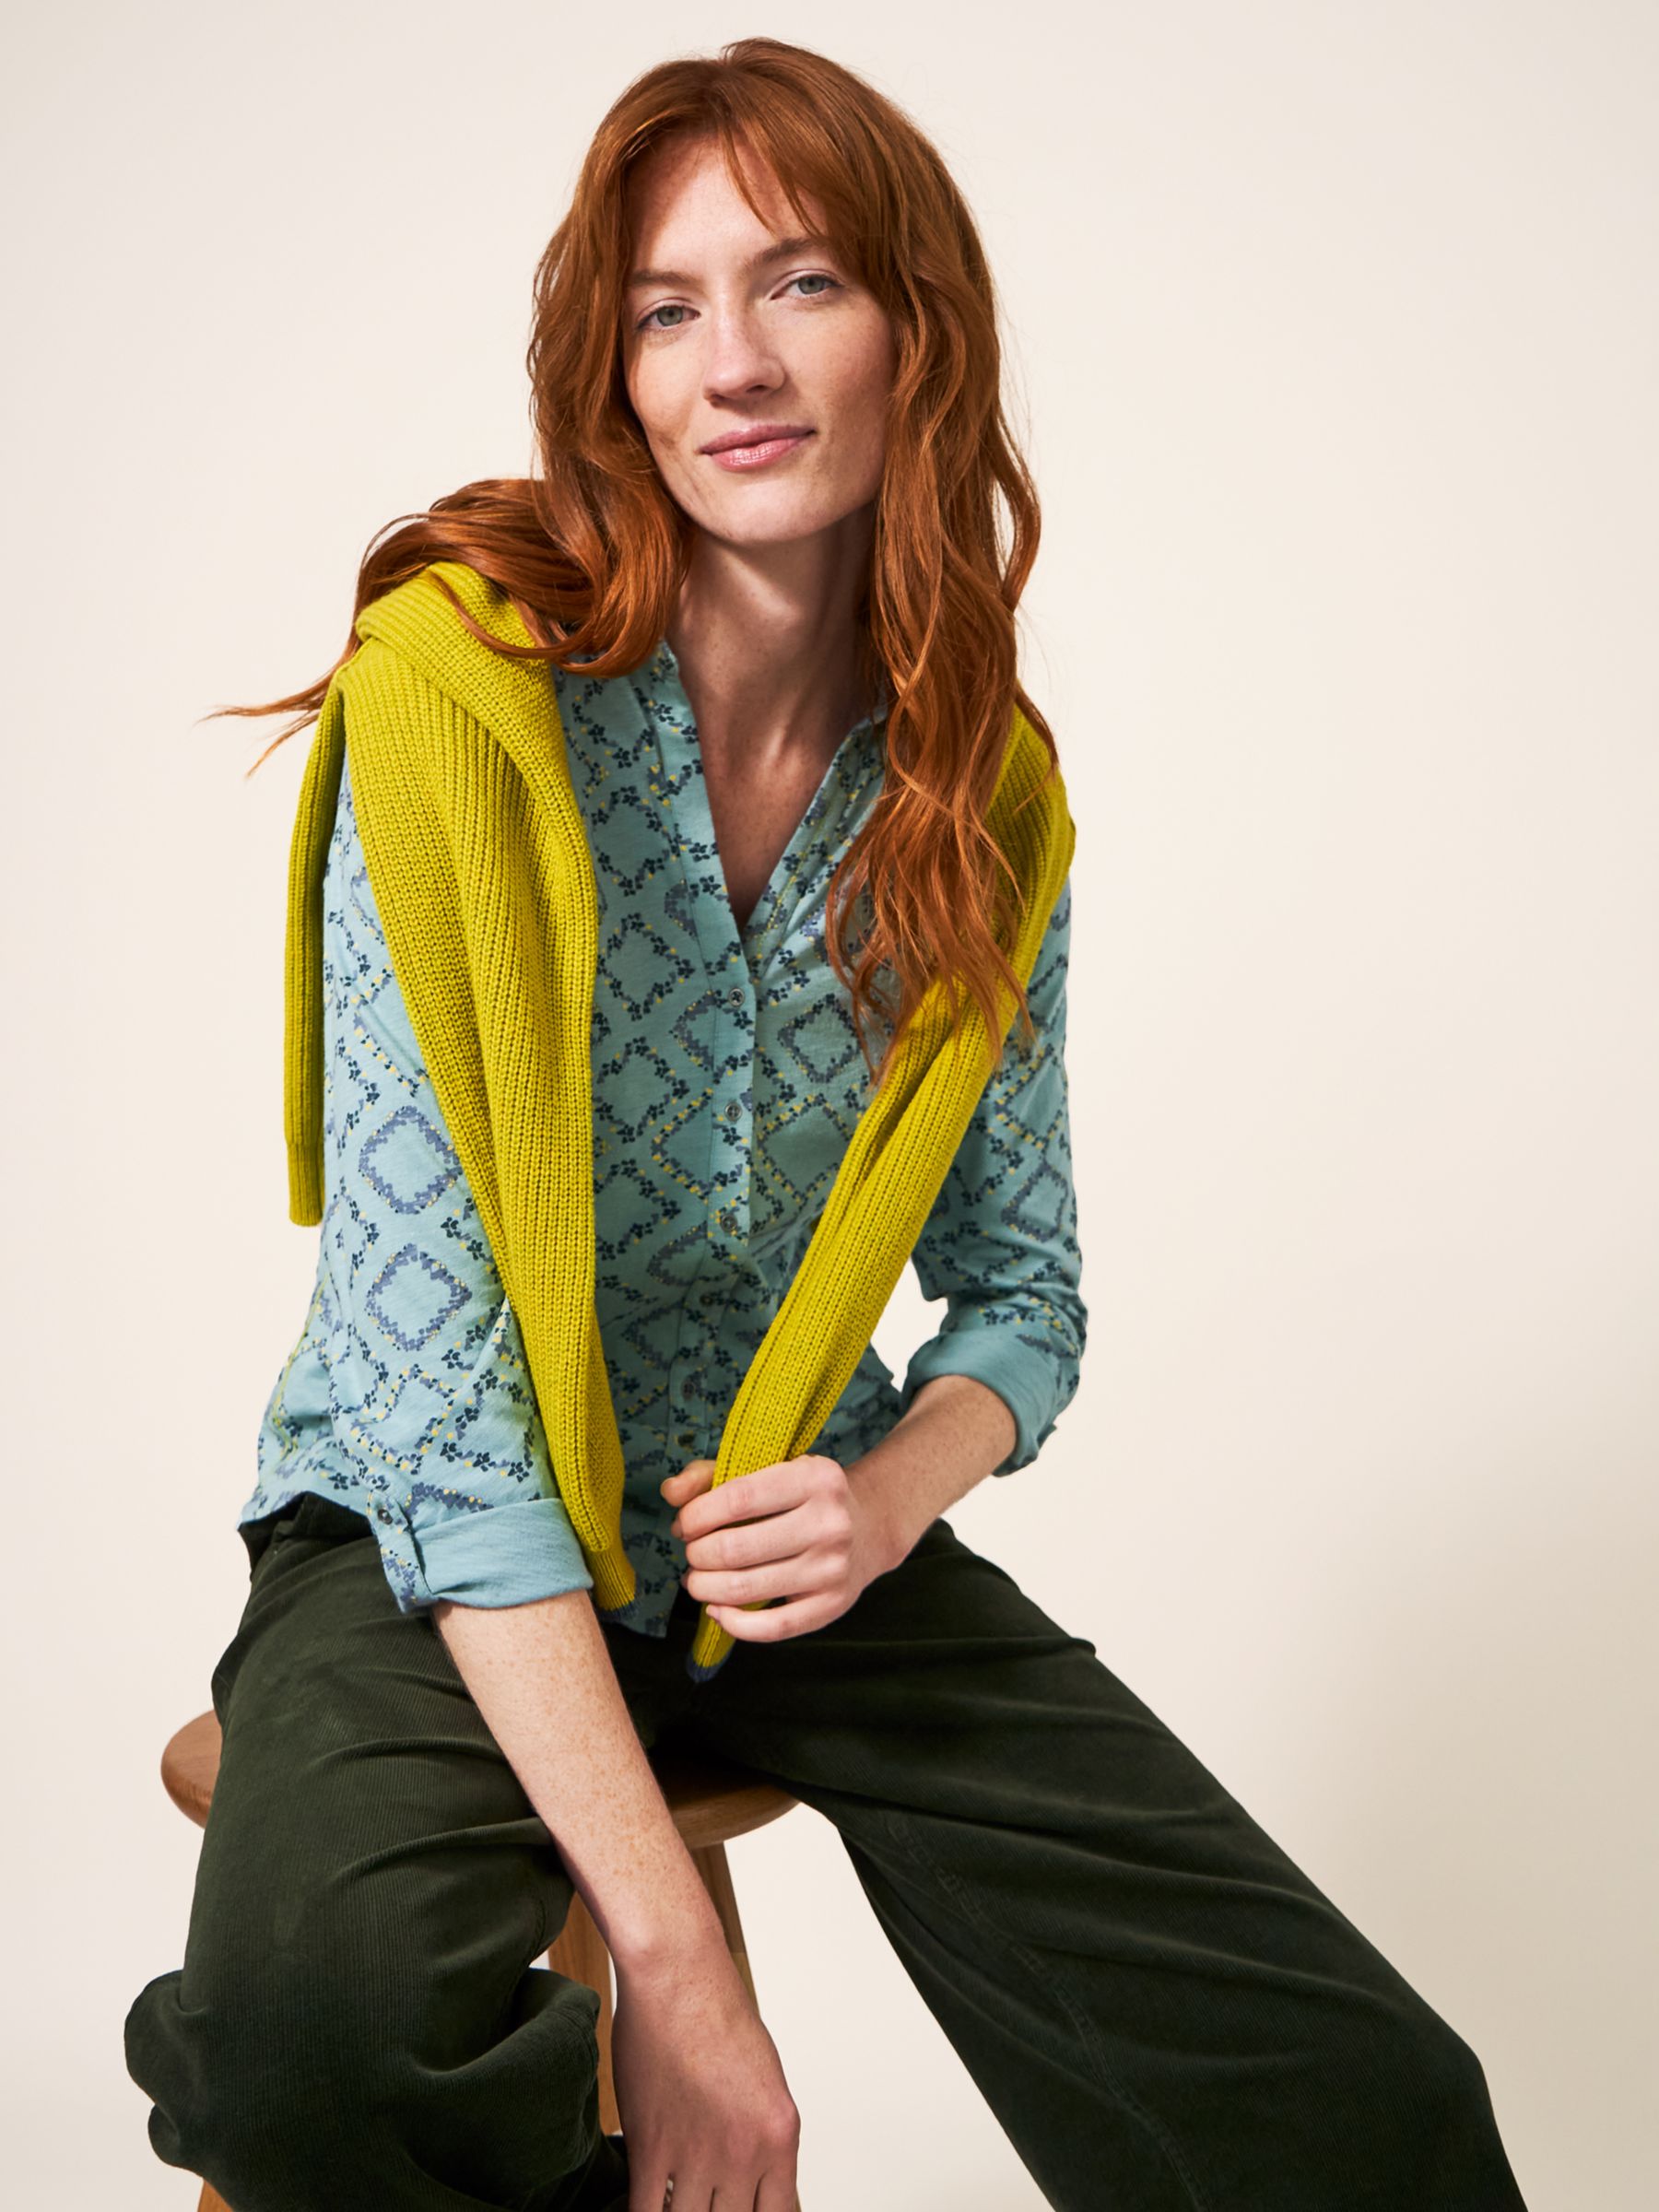 Buy White Stuff Annie Geometric Jersey Shirt, Teal Online at johnlewis.com